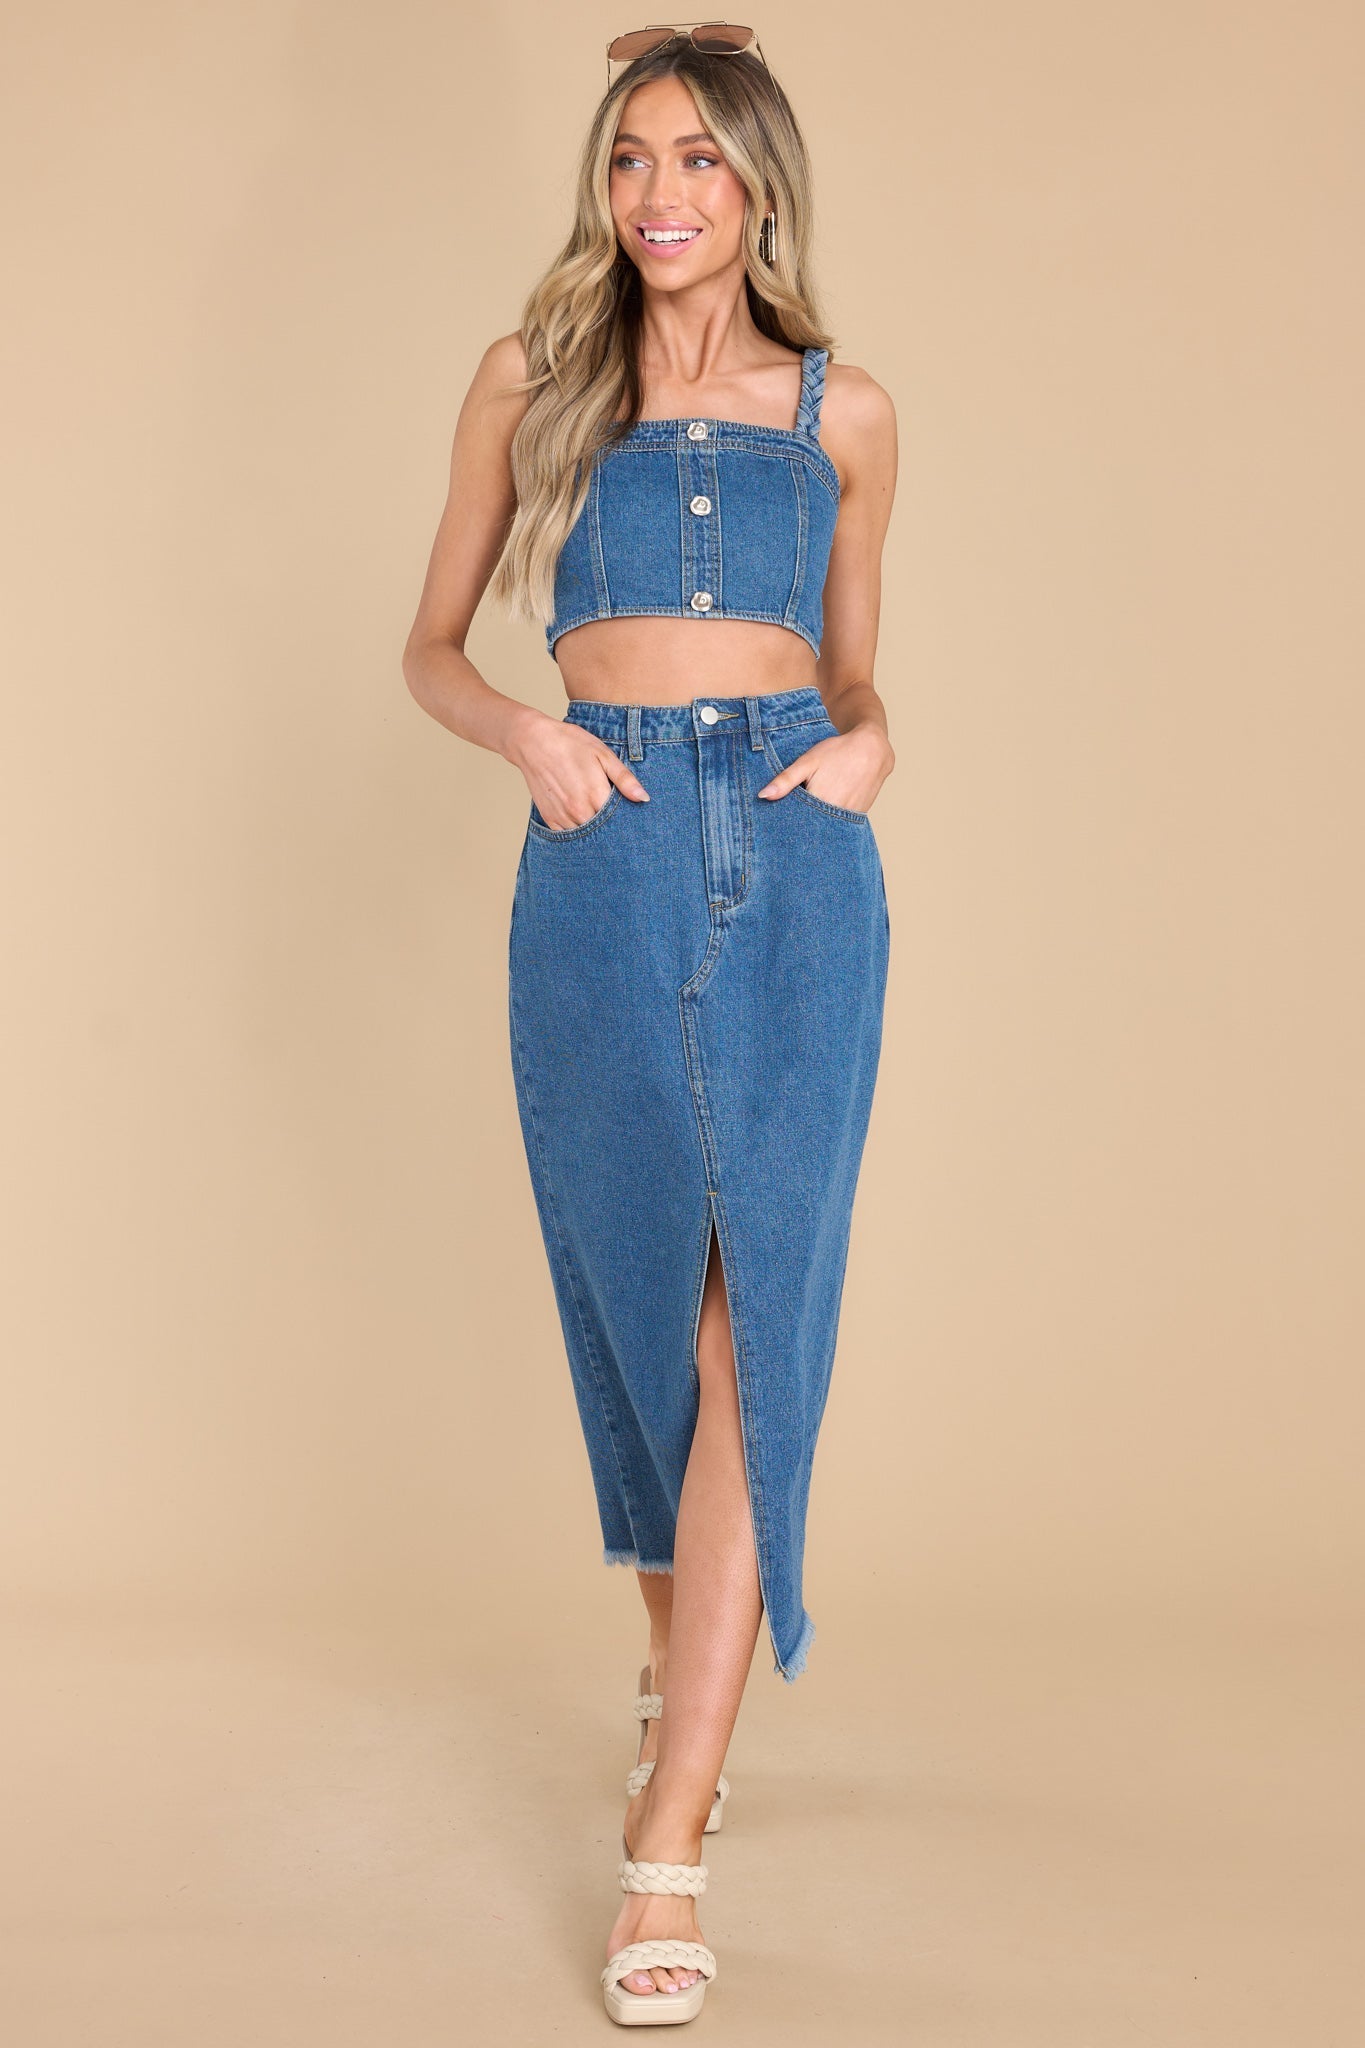 Blue Without You Denim Skirt - Red Dress